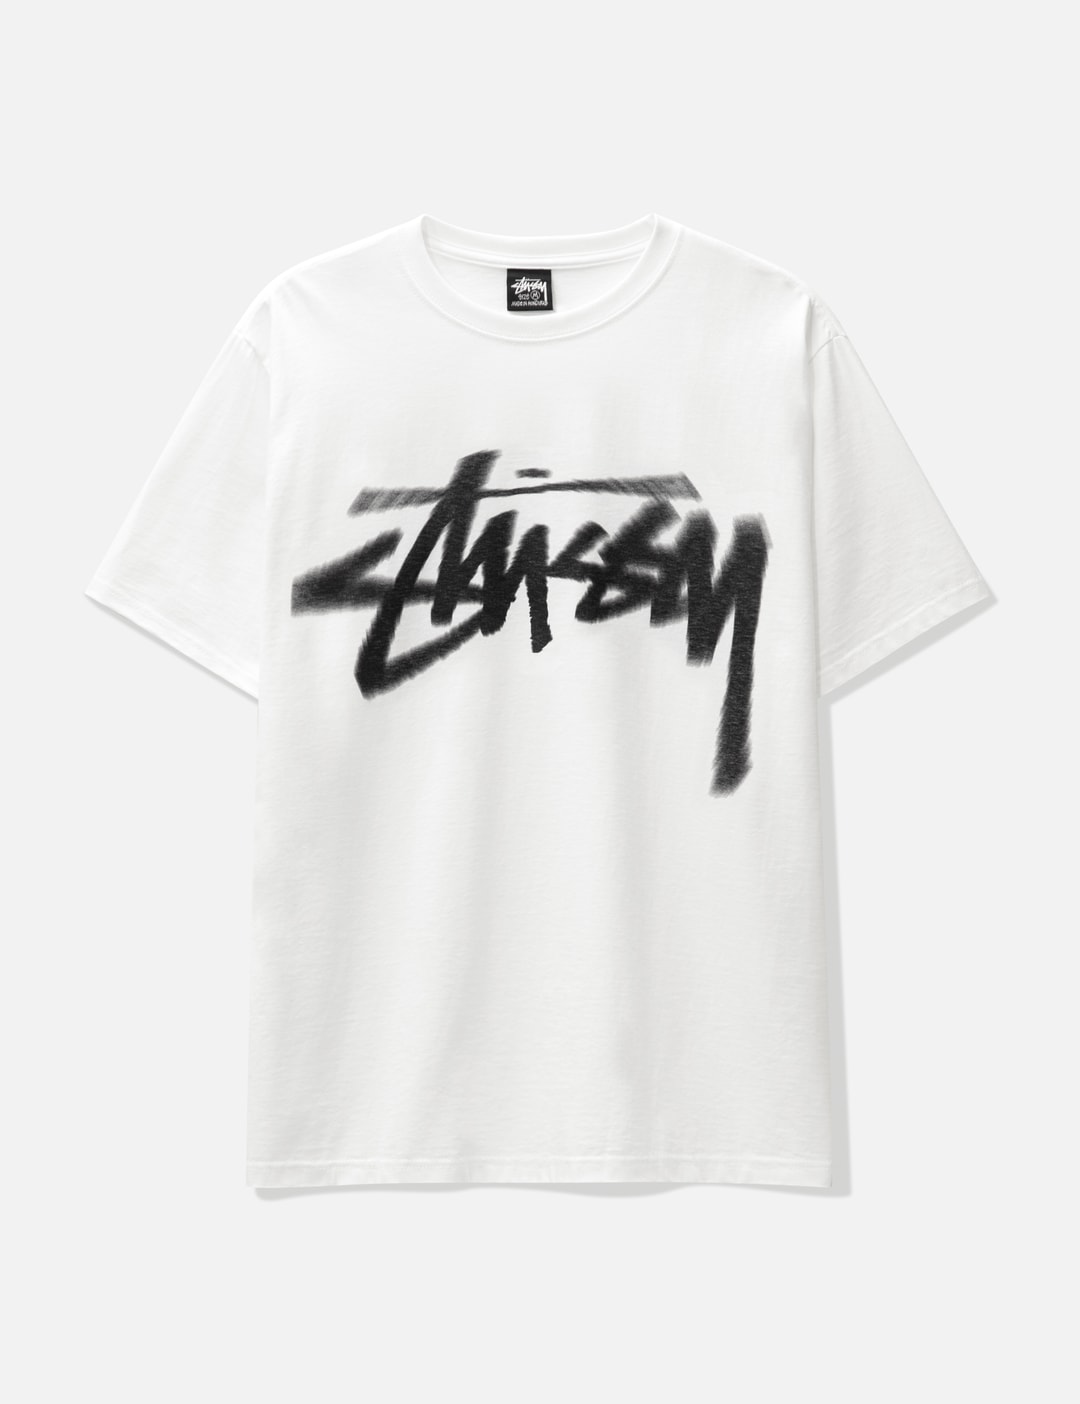 Stüssy - Dizzy Stock T-shirt | HBX - Globally Curated Fashion and ...